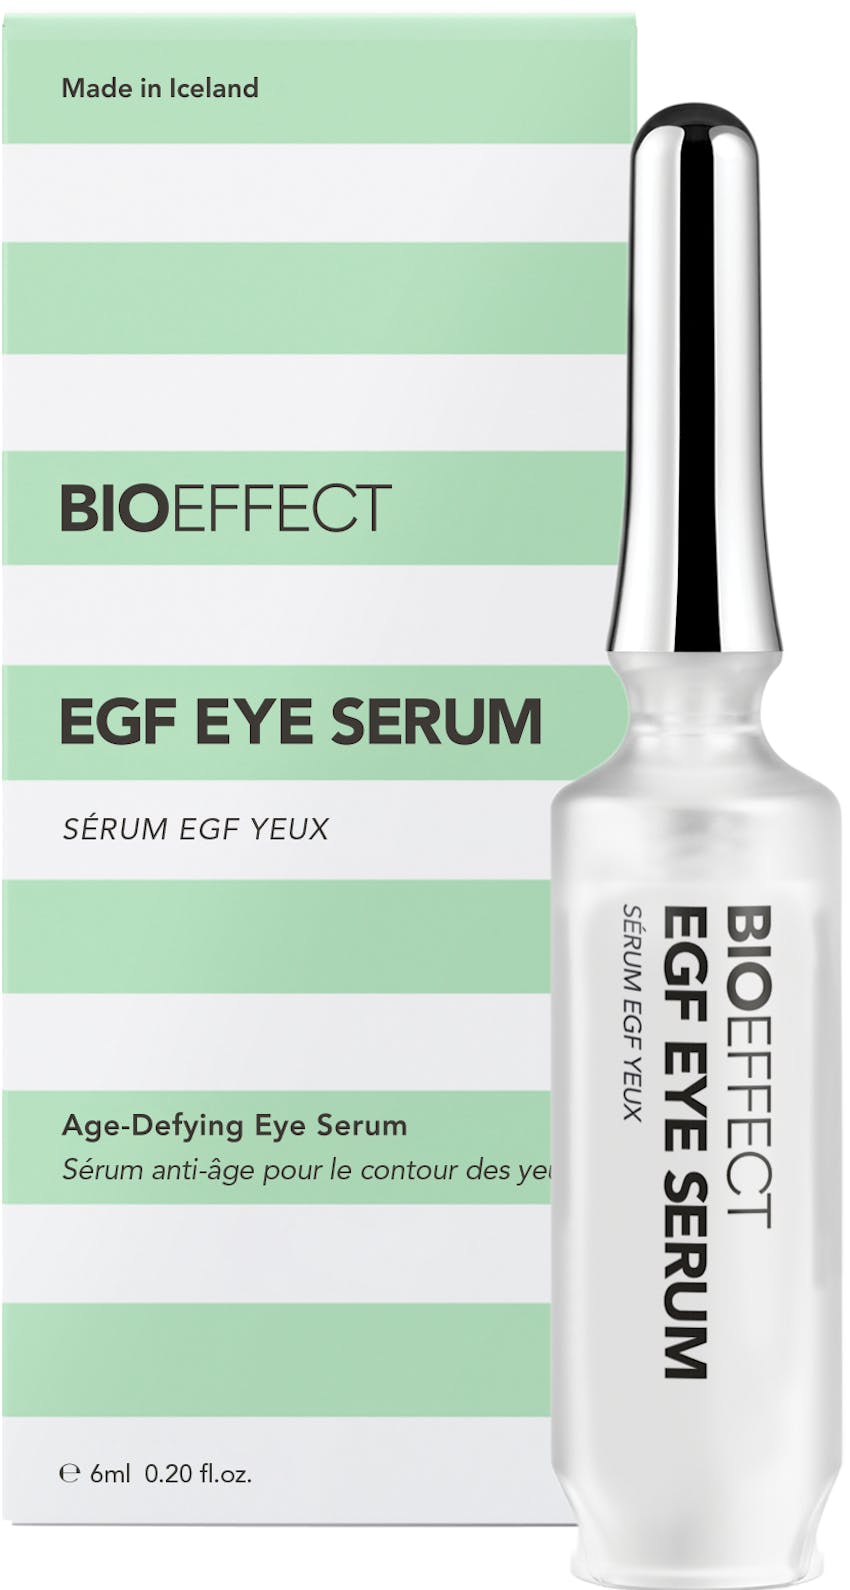 Green-and-white striped, rectangular-shaped package with a bottle of BIOEFFECT EGF Under Eye Skin Care Eye Serum to the right of the package.